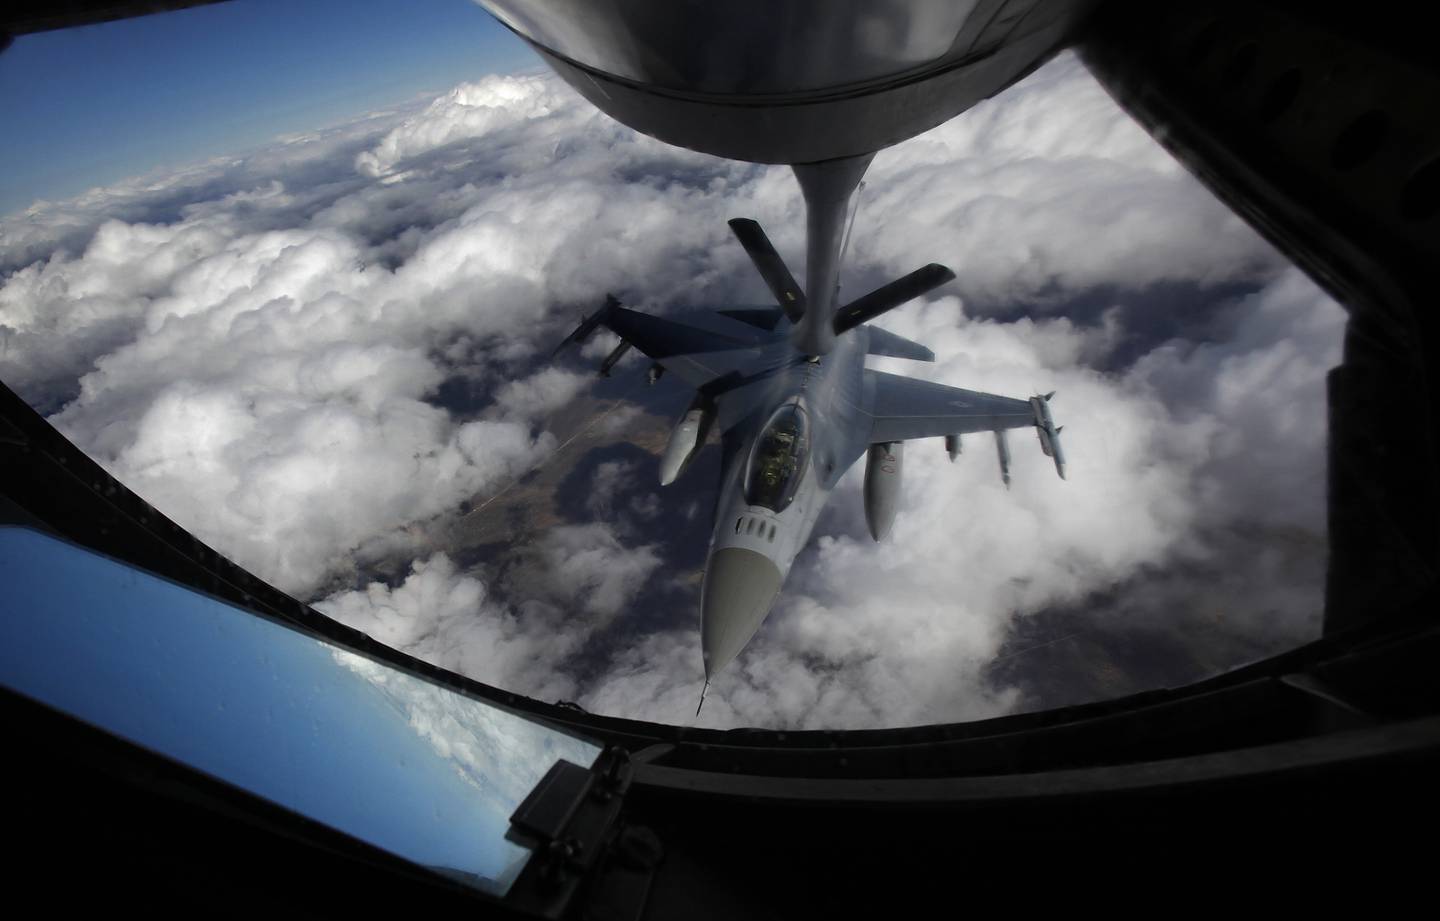 A U.S. Air Force F-16 refuels in mid-flight from a KC-135 Stratotanker during a Red Flag exercise over The Nevada Test and Training Range on Feb. 10, 2014.